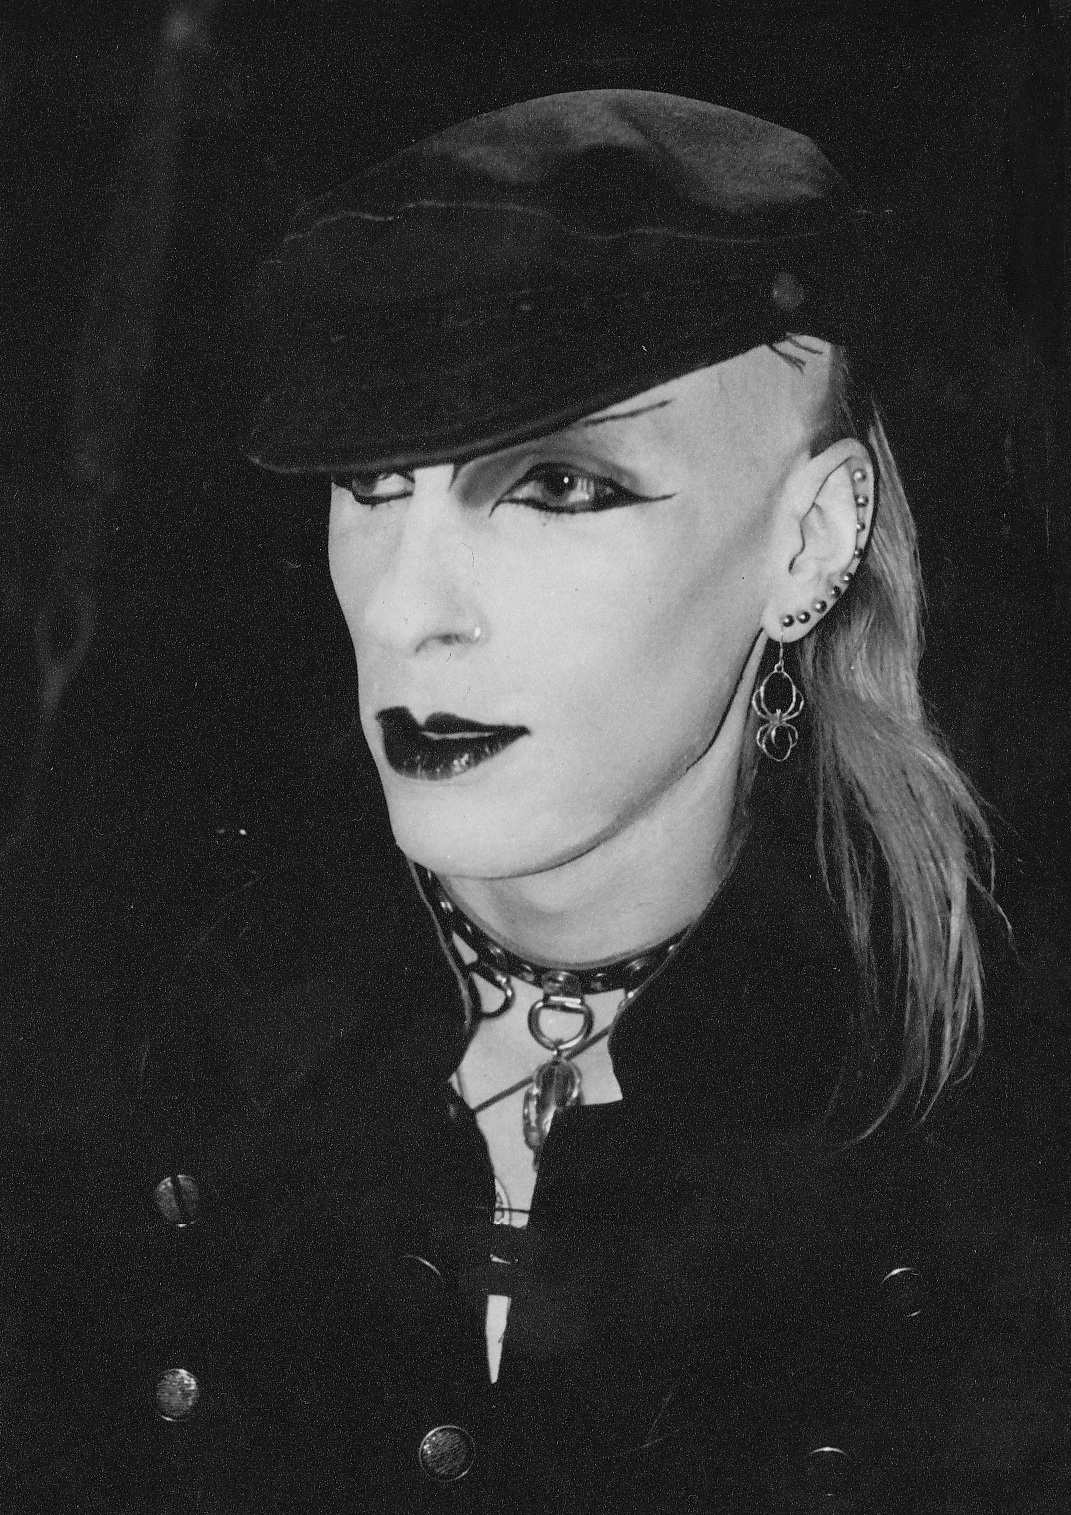 woman with makeup wearing a black hat and stud earrings